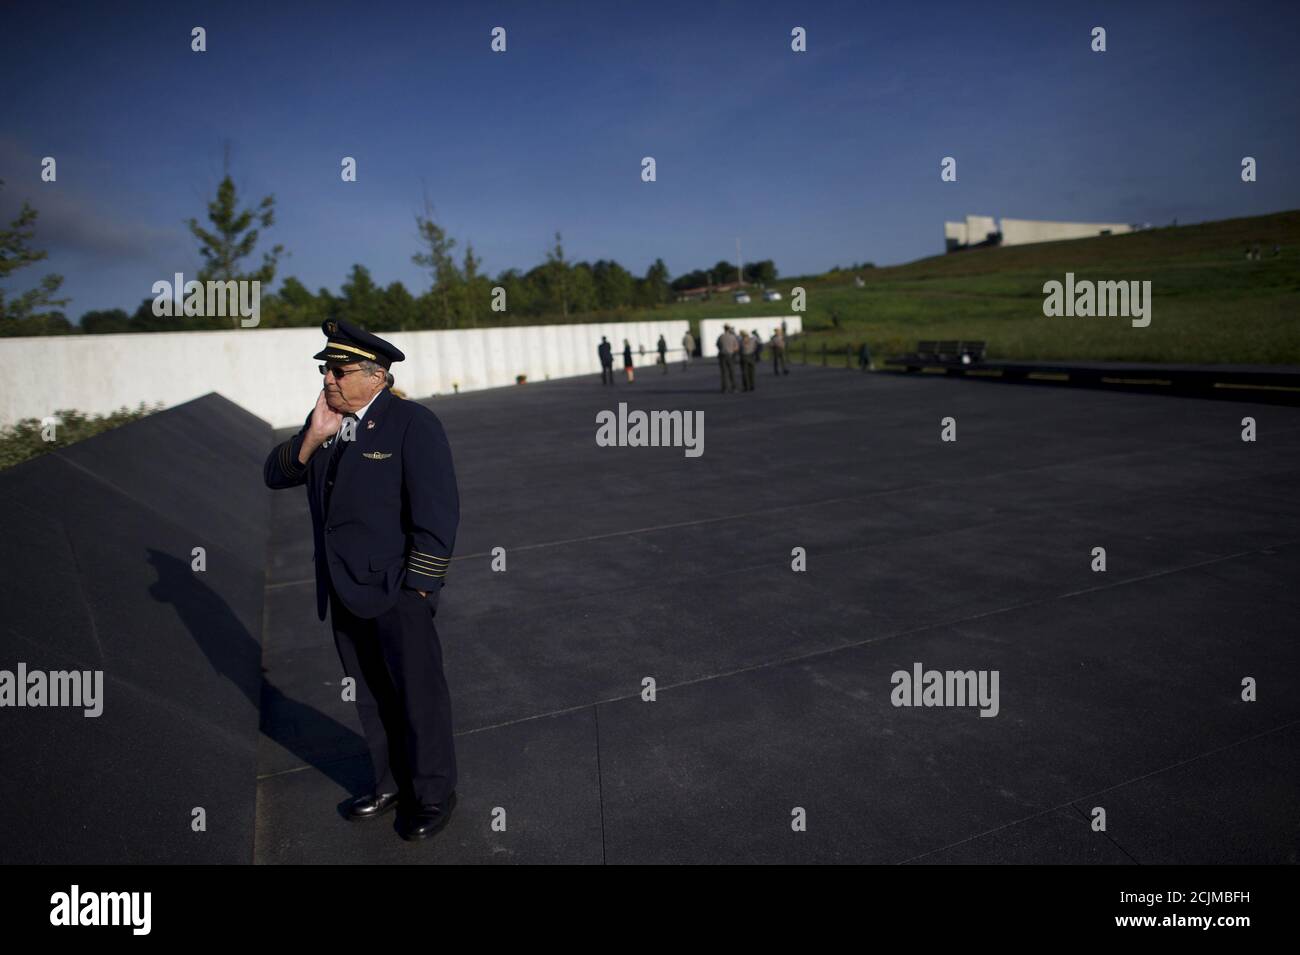 REFILE - CORRECTING NAME OF SUBJECTRetired United Airlines Captain Morrie Wiener, who retired on September 1, 2011, had been scheduled to pilot Flight 93, and worked with many of the airline staff that died, visits the Flight 93 National Memorial, which officially opened yesterday in Shanksville, Pennsylvania September 11, 2015. Relatives gathered to commemorate nearly 3,000 people killed in the September 11 attacks in New York, Pennsylvania and outside Washington 14 years ago, when airliners hijacked by al Qaeda militants brought death, mayhem and destruction. REUTERS/Mark Makela Stock Photo